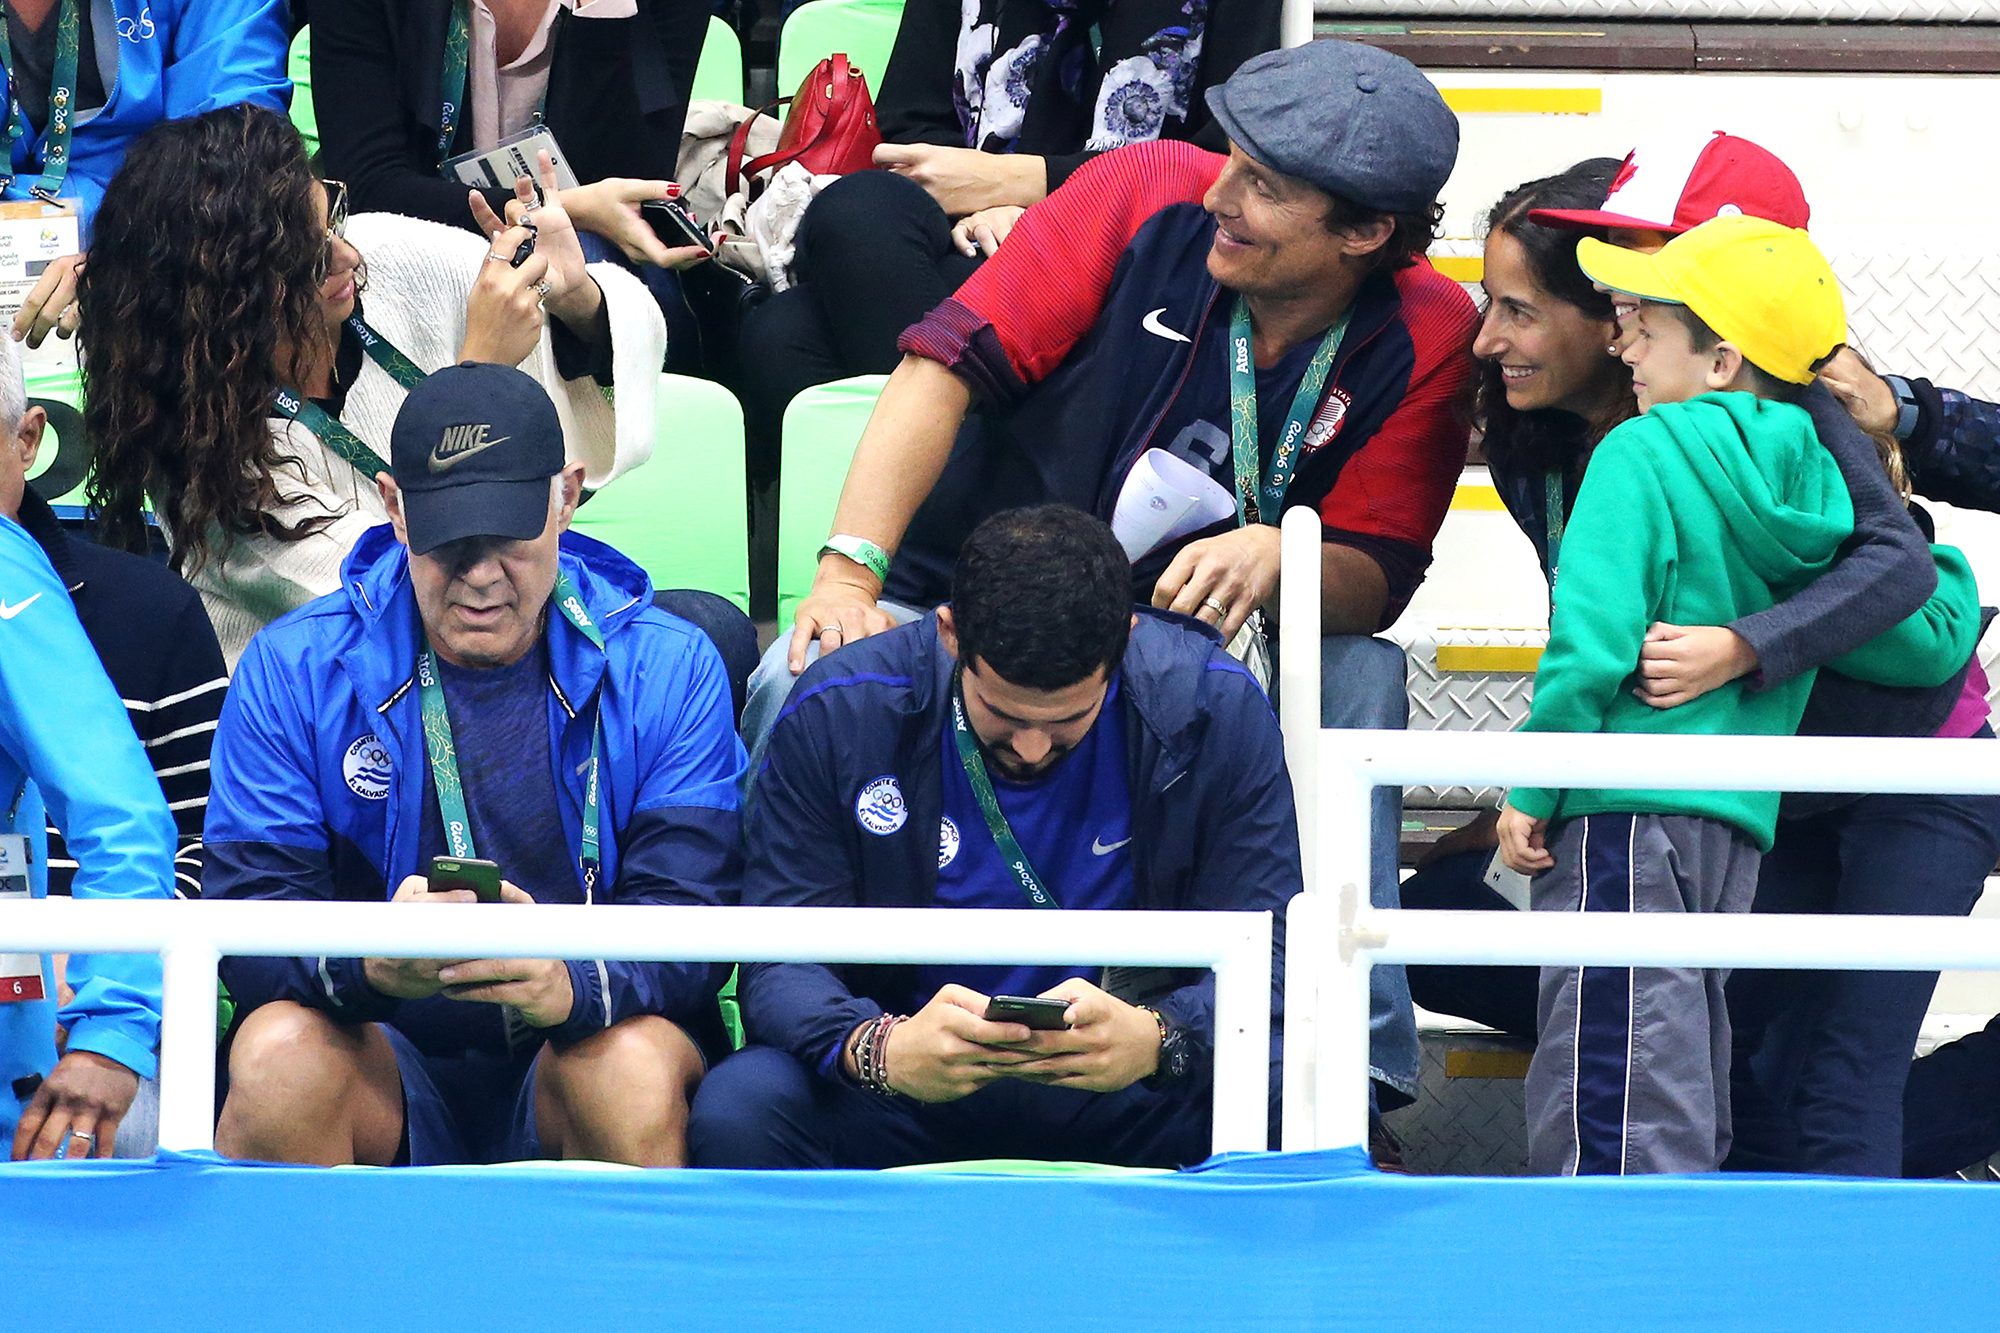 Camila Alves takes a picture of Matthew McConaughey with fans during the swimming finals on day 5 of the Rio 2016 Olympic Games, on Aug. 10, 2016 in Rio de Janeiro, Brazil.